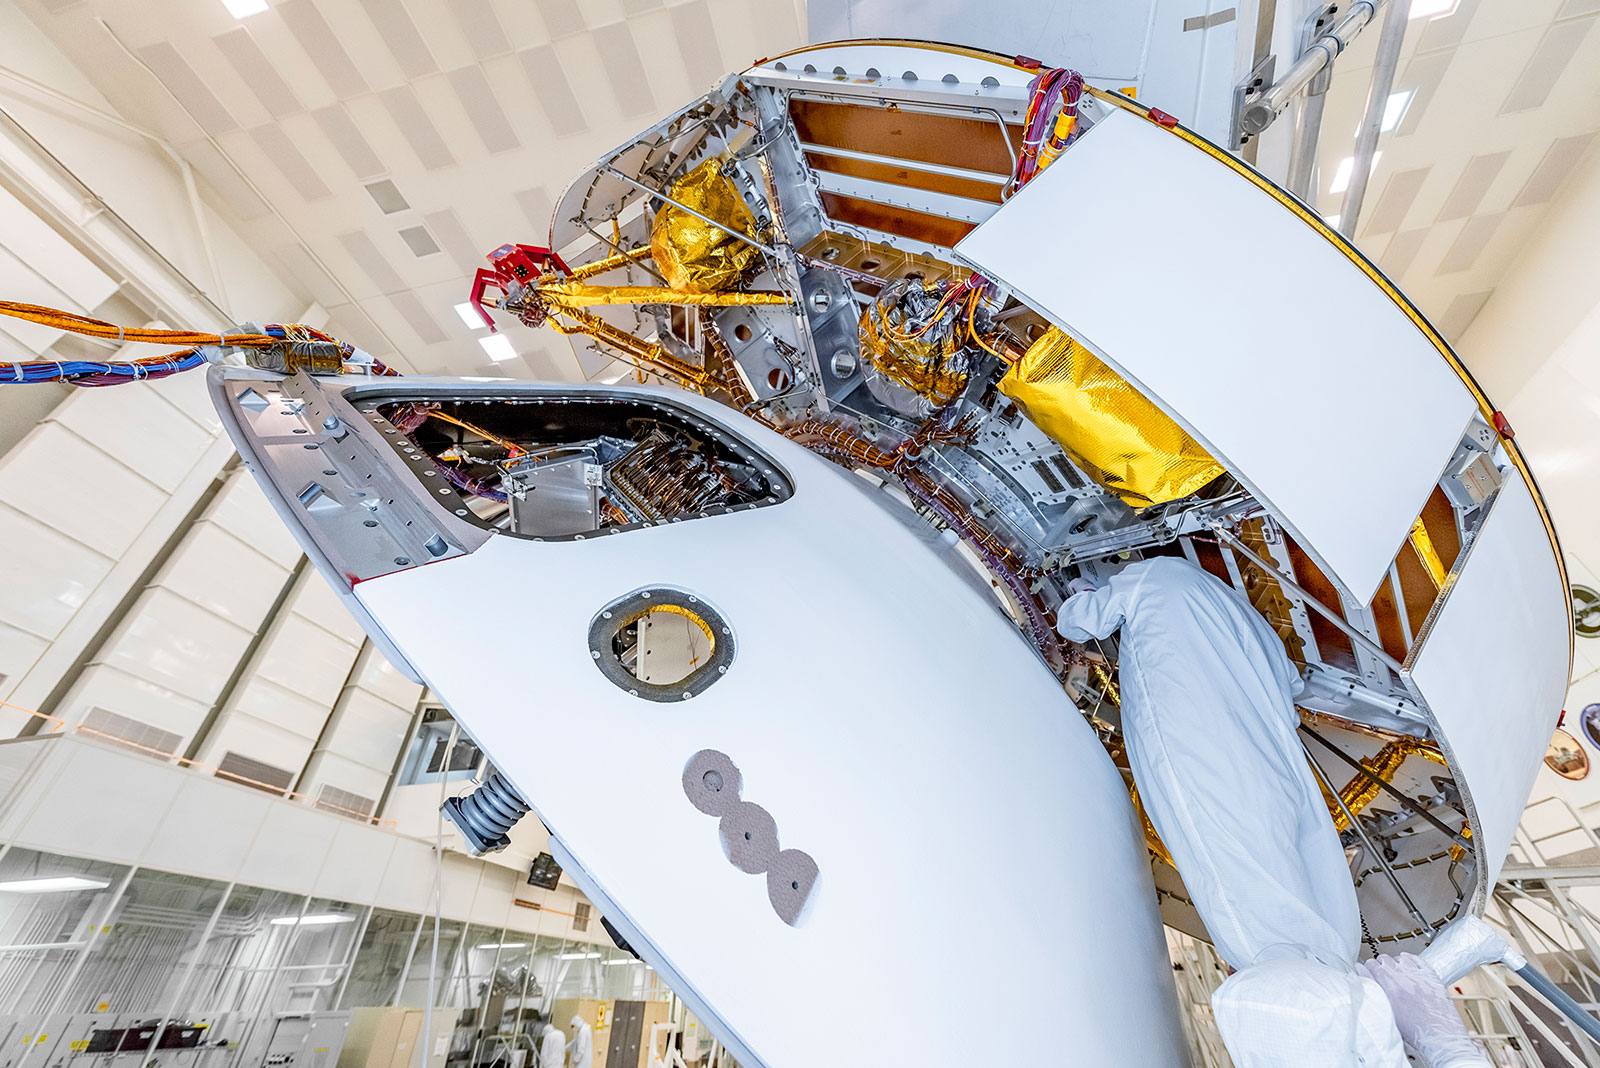 A member of NASA's Mars 2020 project checks connections between the spacecraft's back shell and cruise stage.